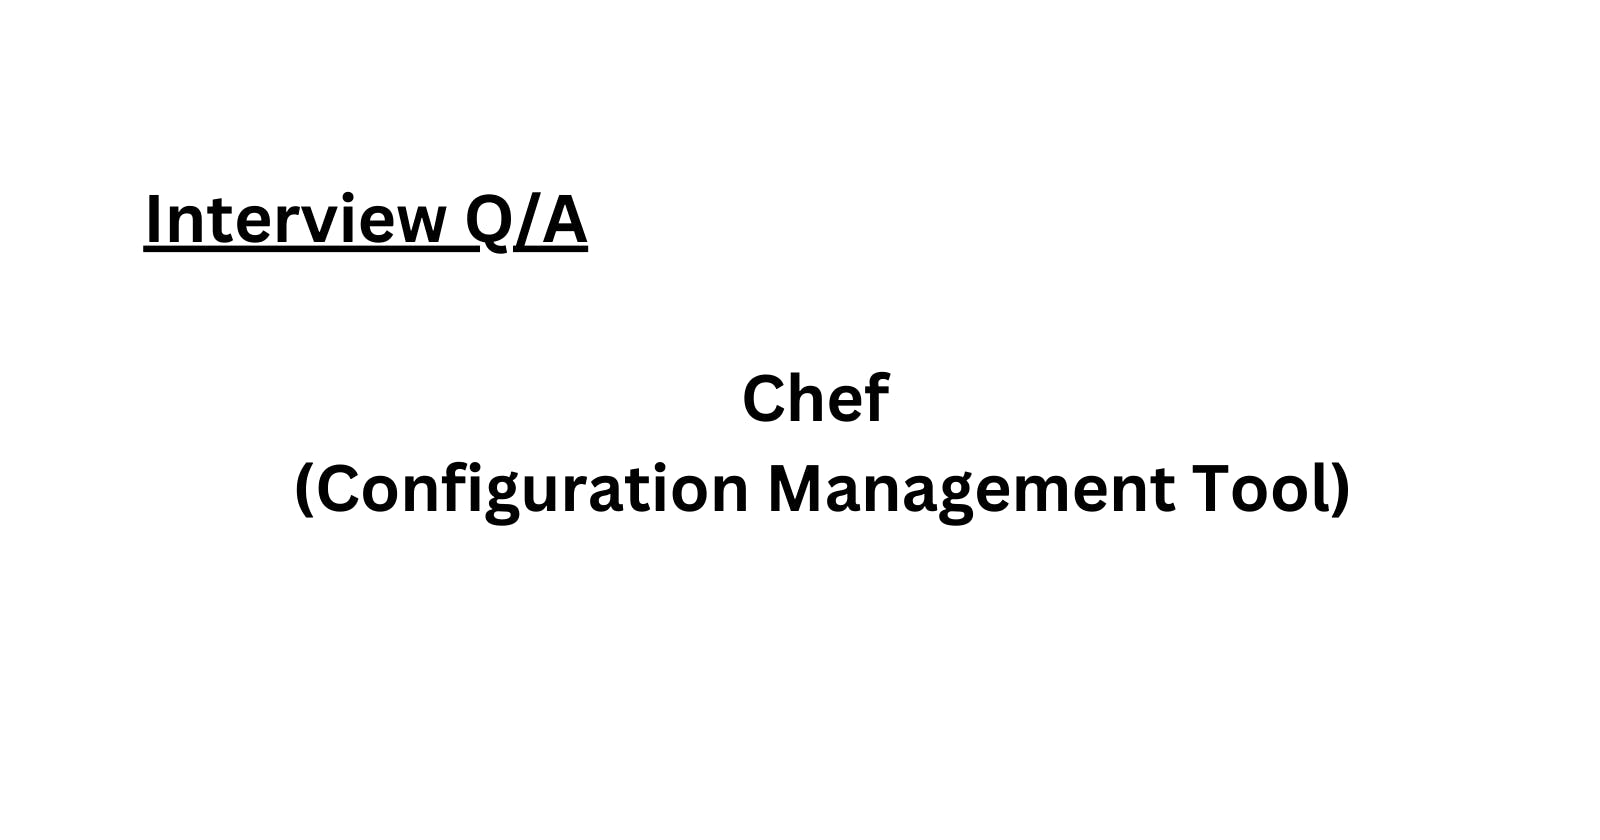 Chef: A Configuration Management Tool Overview